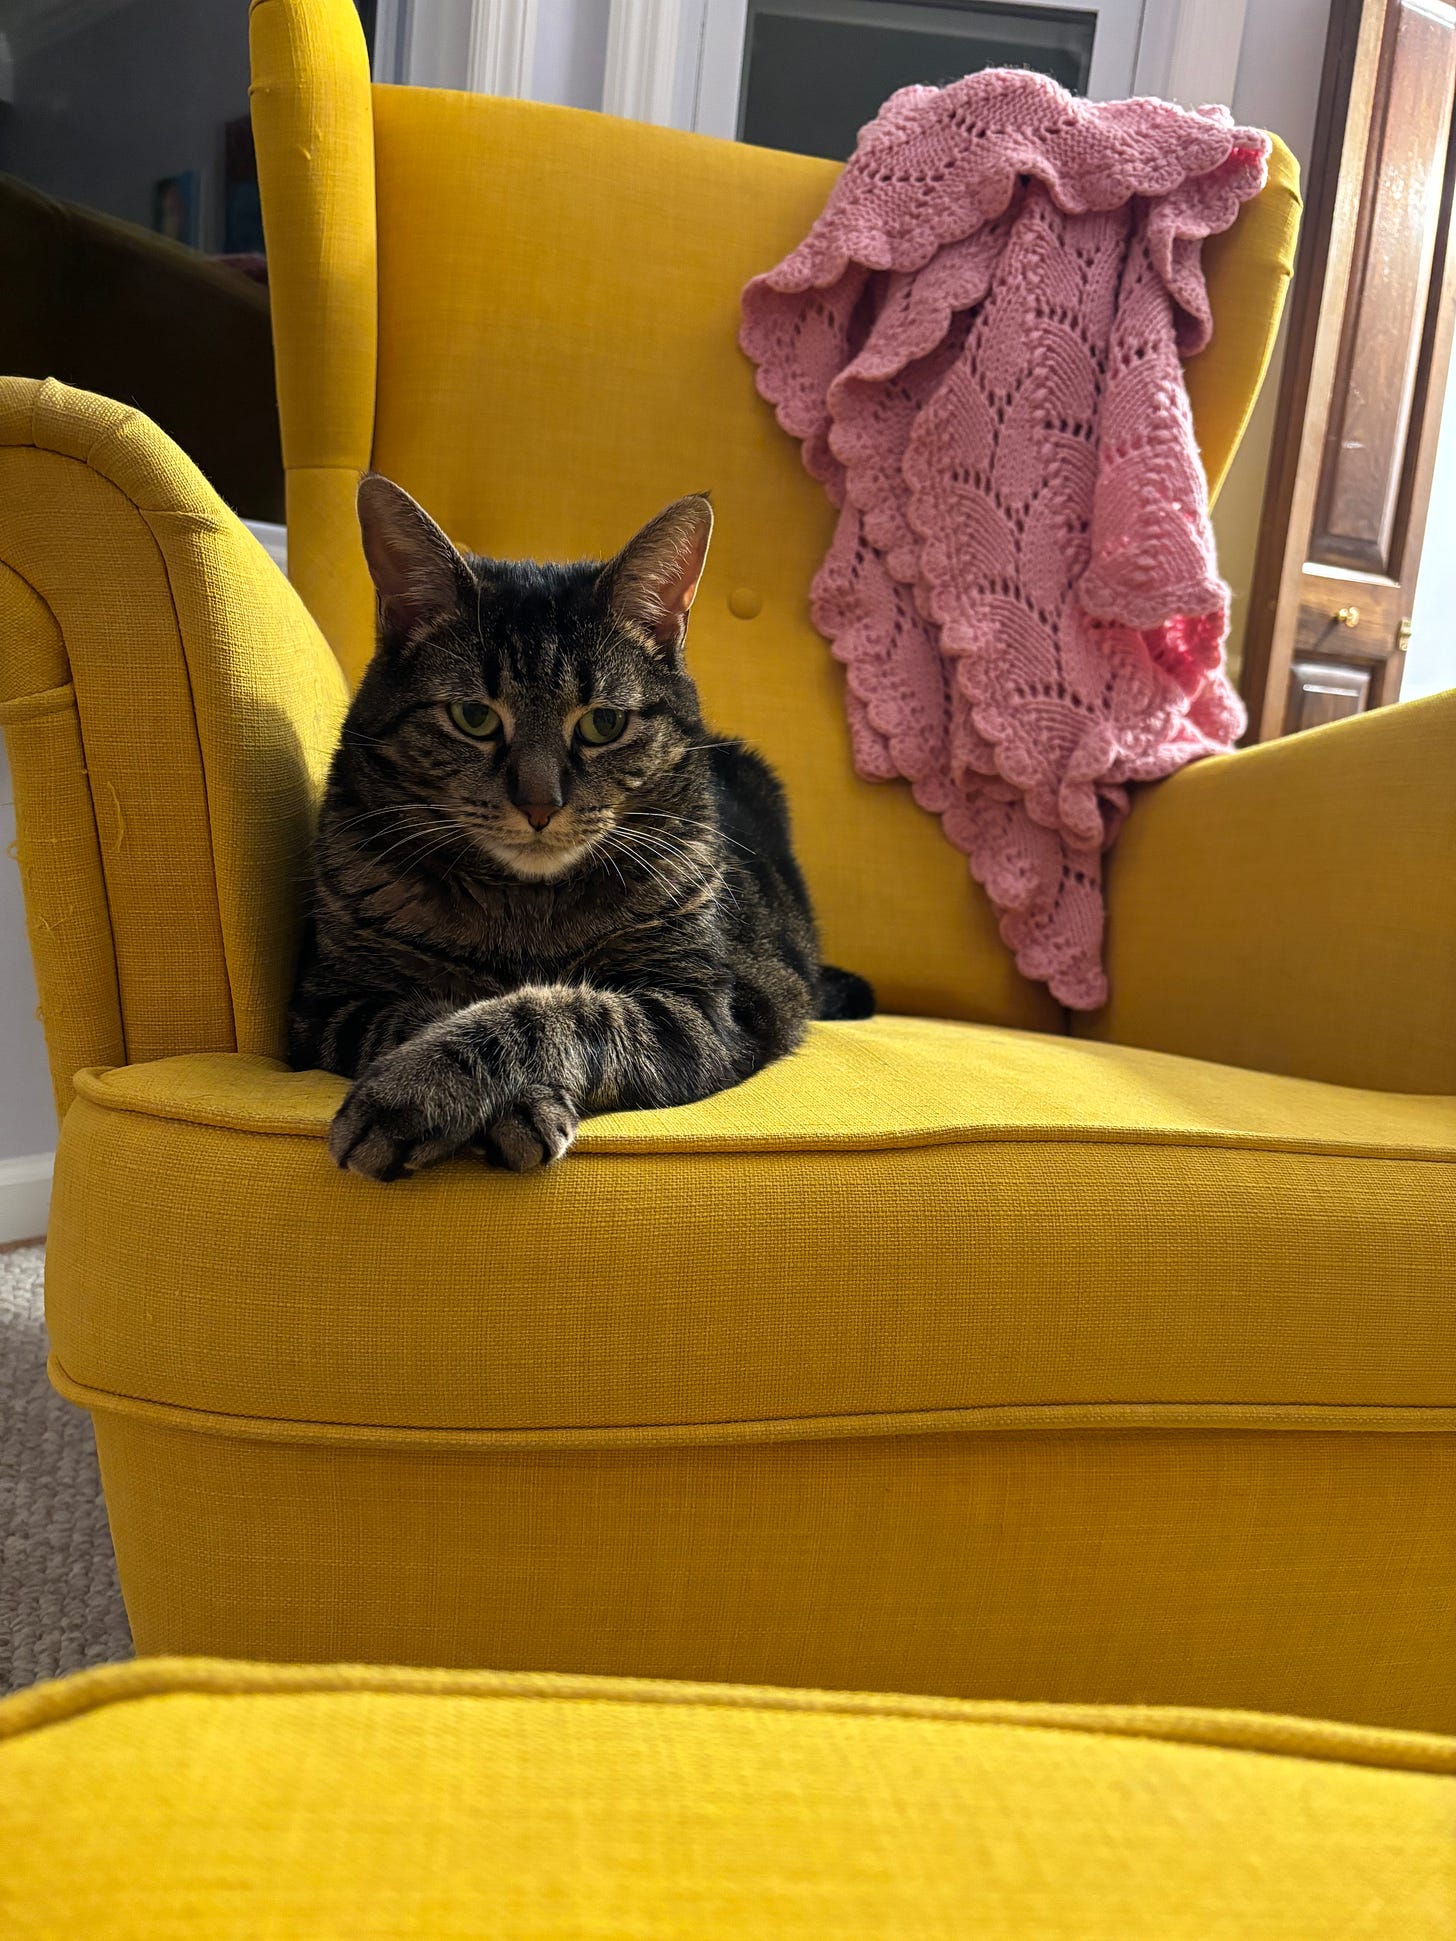 A tabby cat sits with her paws crossed on a yellow armchair with a pink crocheted blanket across the back